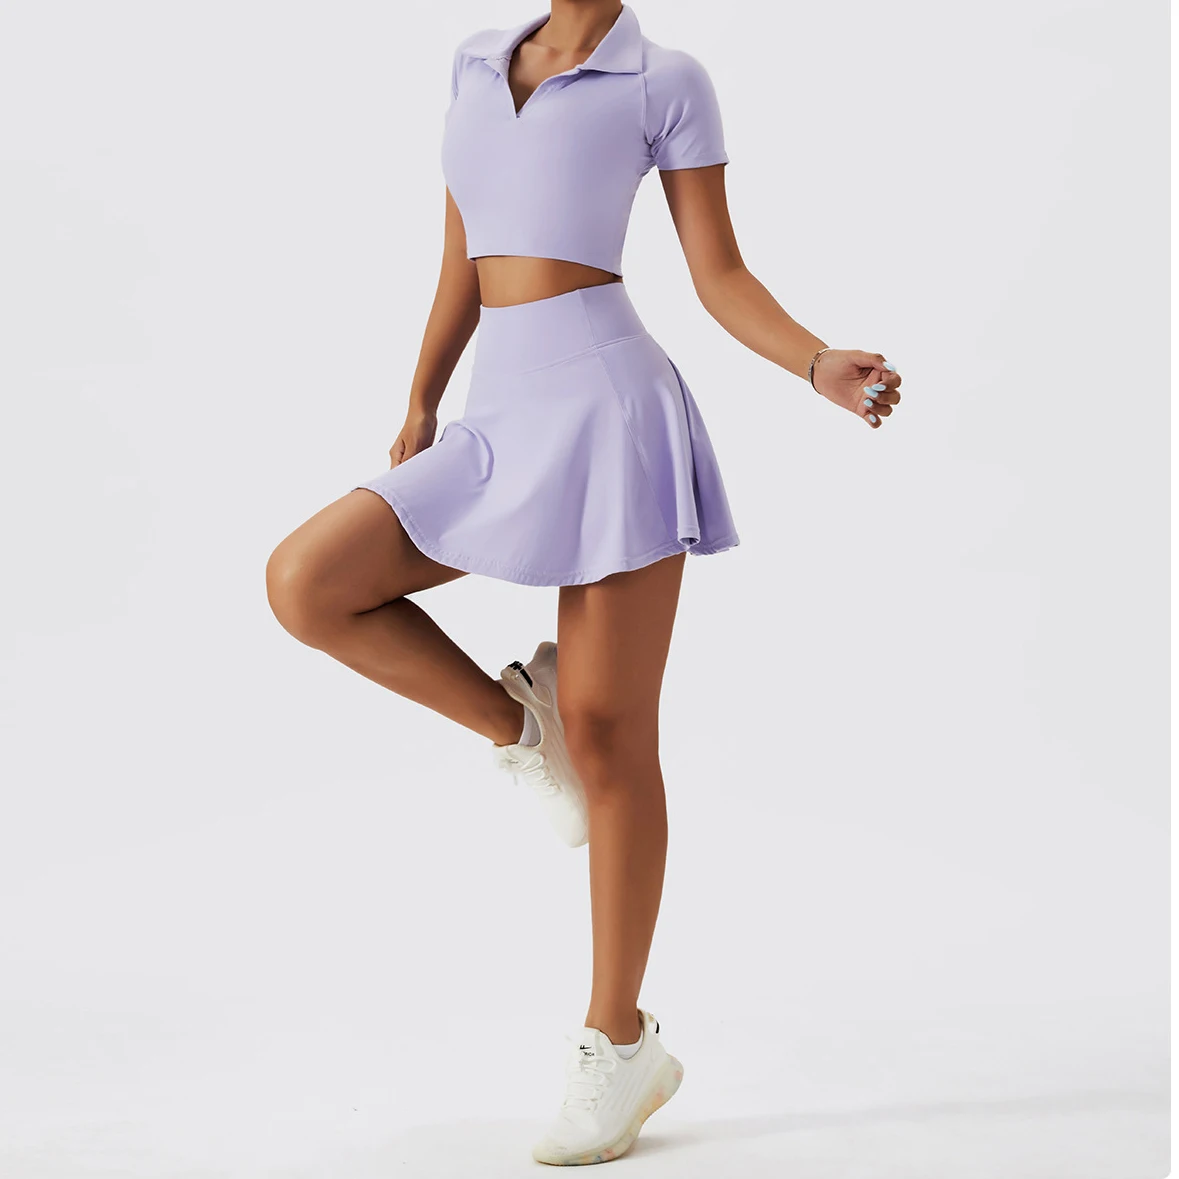 YIYI Naked Feeling Polo Tops Golf Sets For Women 2 In 1 Skirts Quick Dry Tennis Fashion Sets Girls Tennis Skirt Two Piece Sets